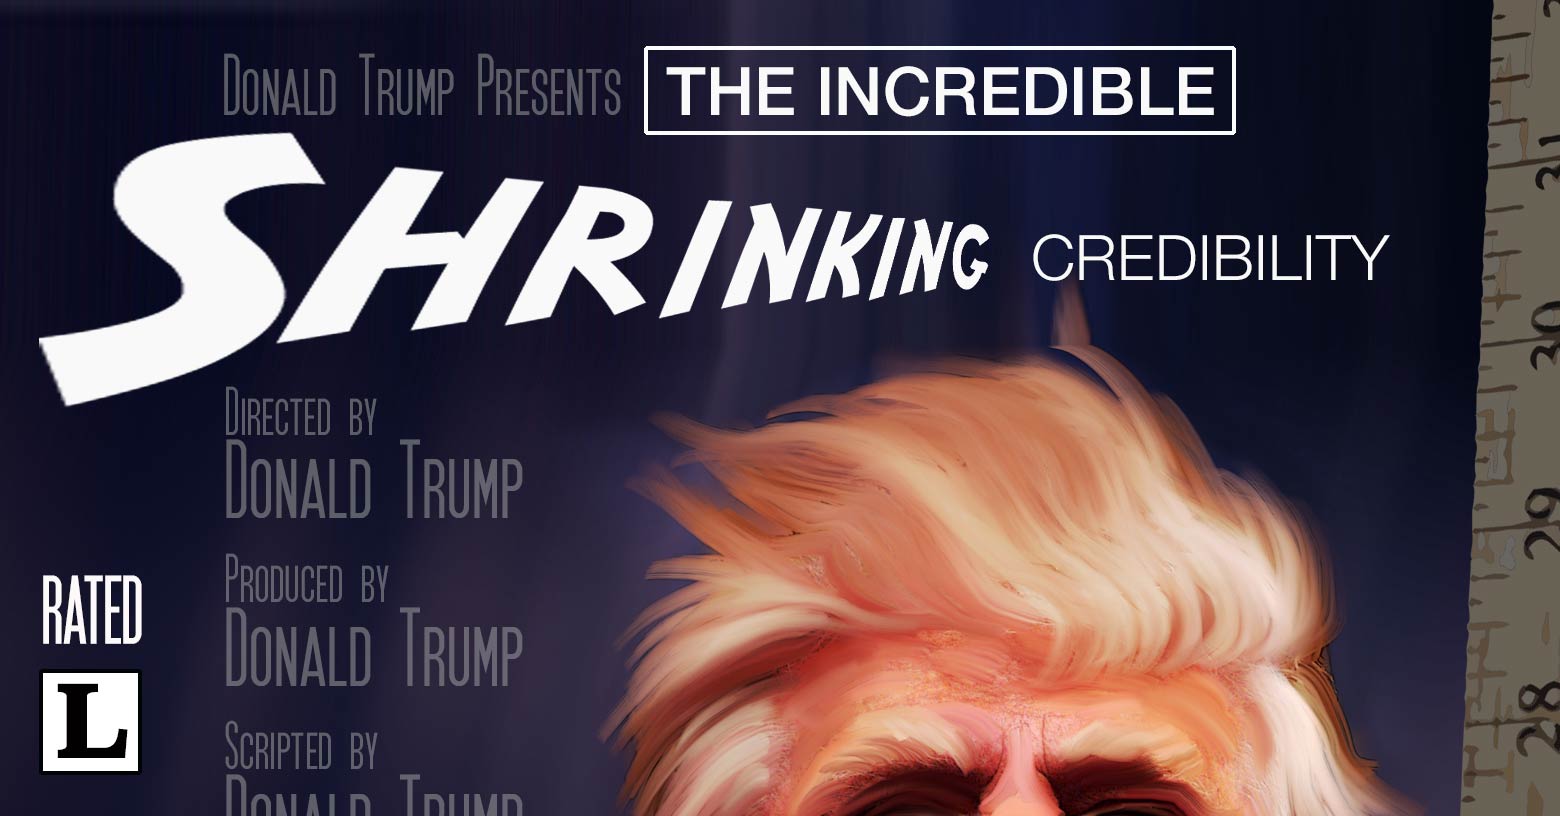 The incredible shrinking President Trump.